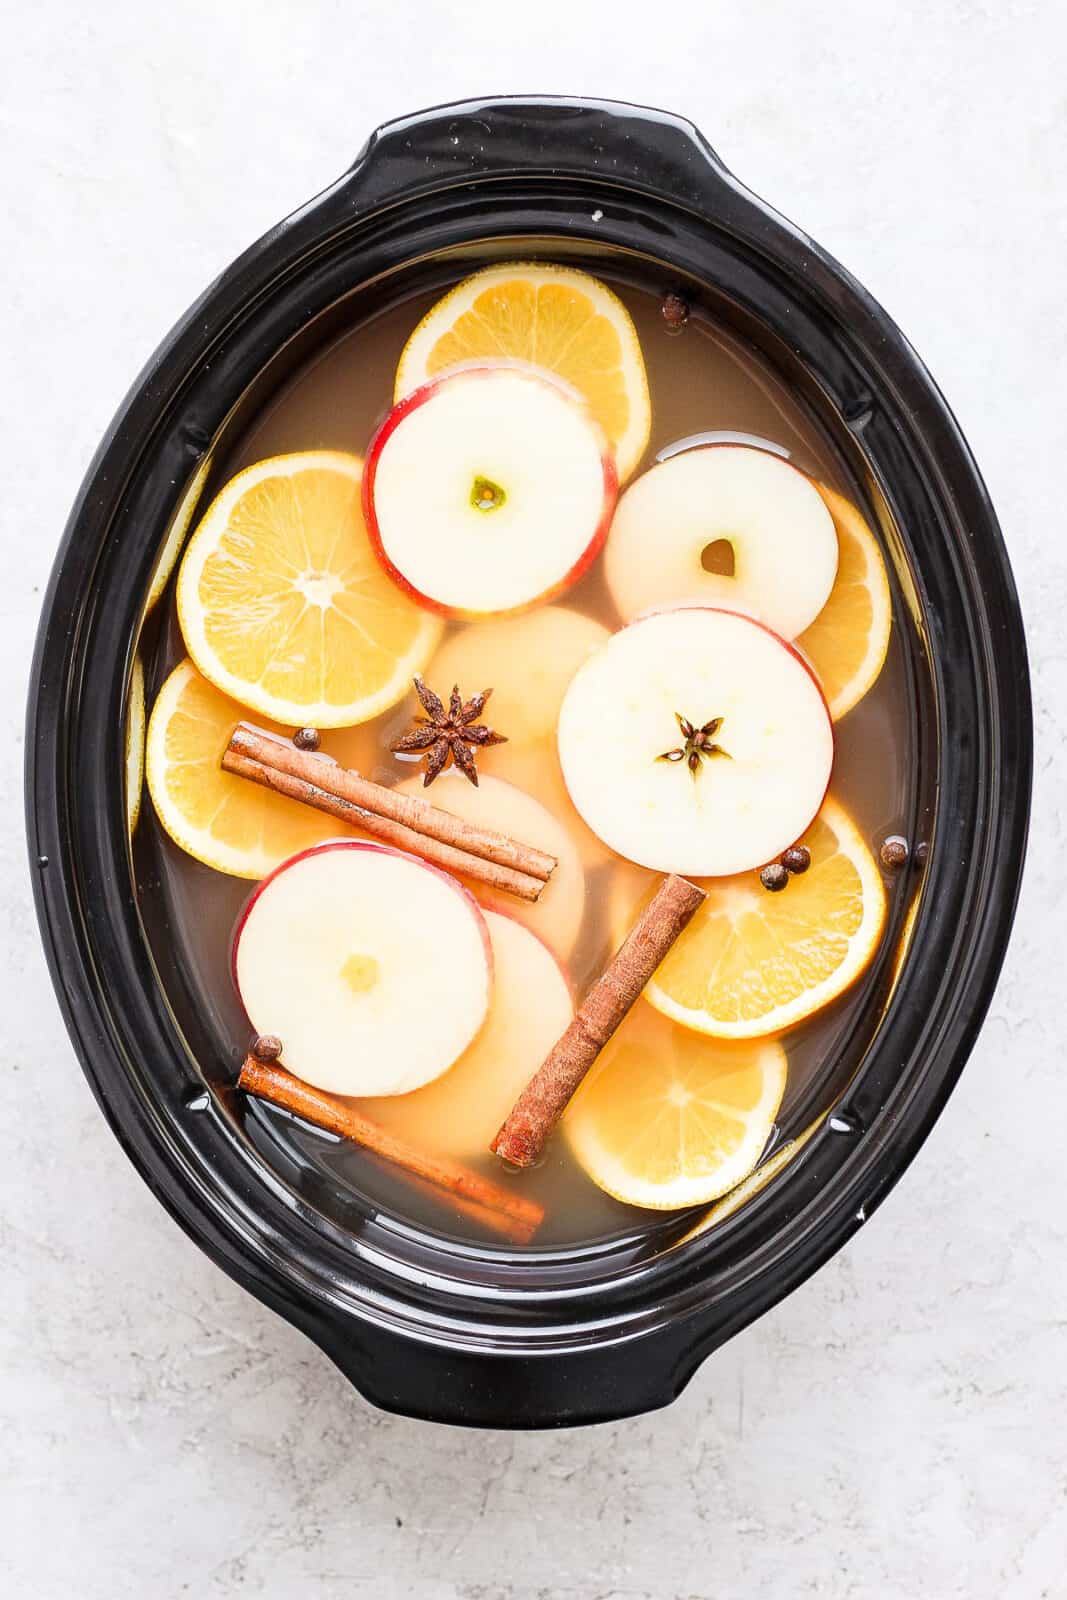 Spiked apple cider in a slow cooker.